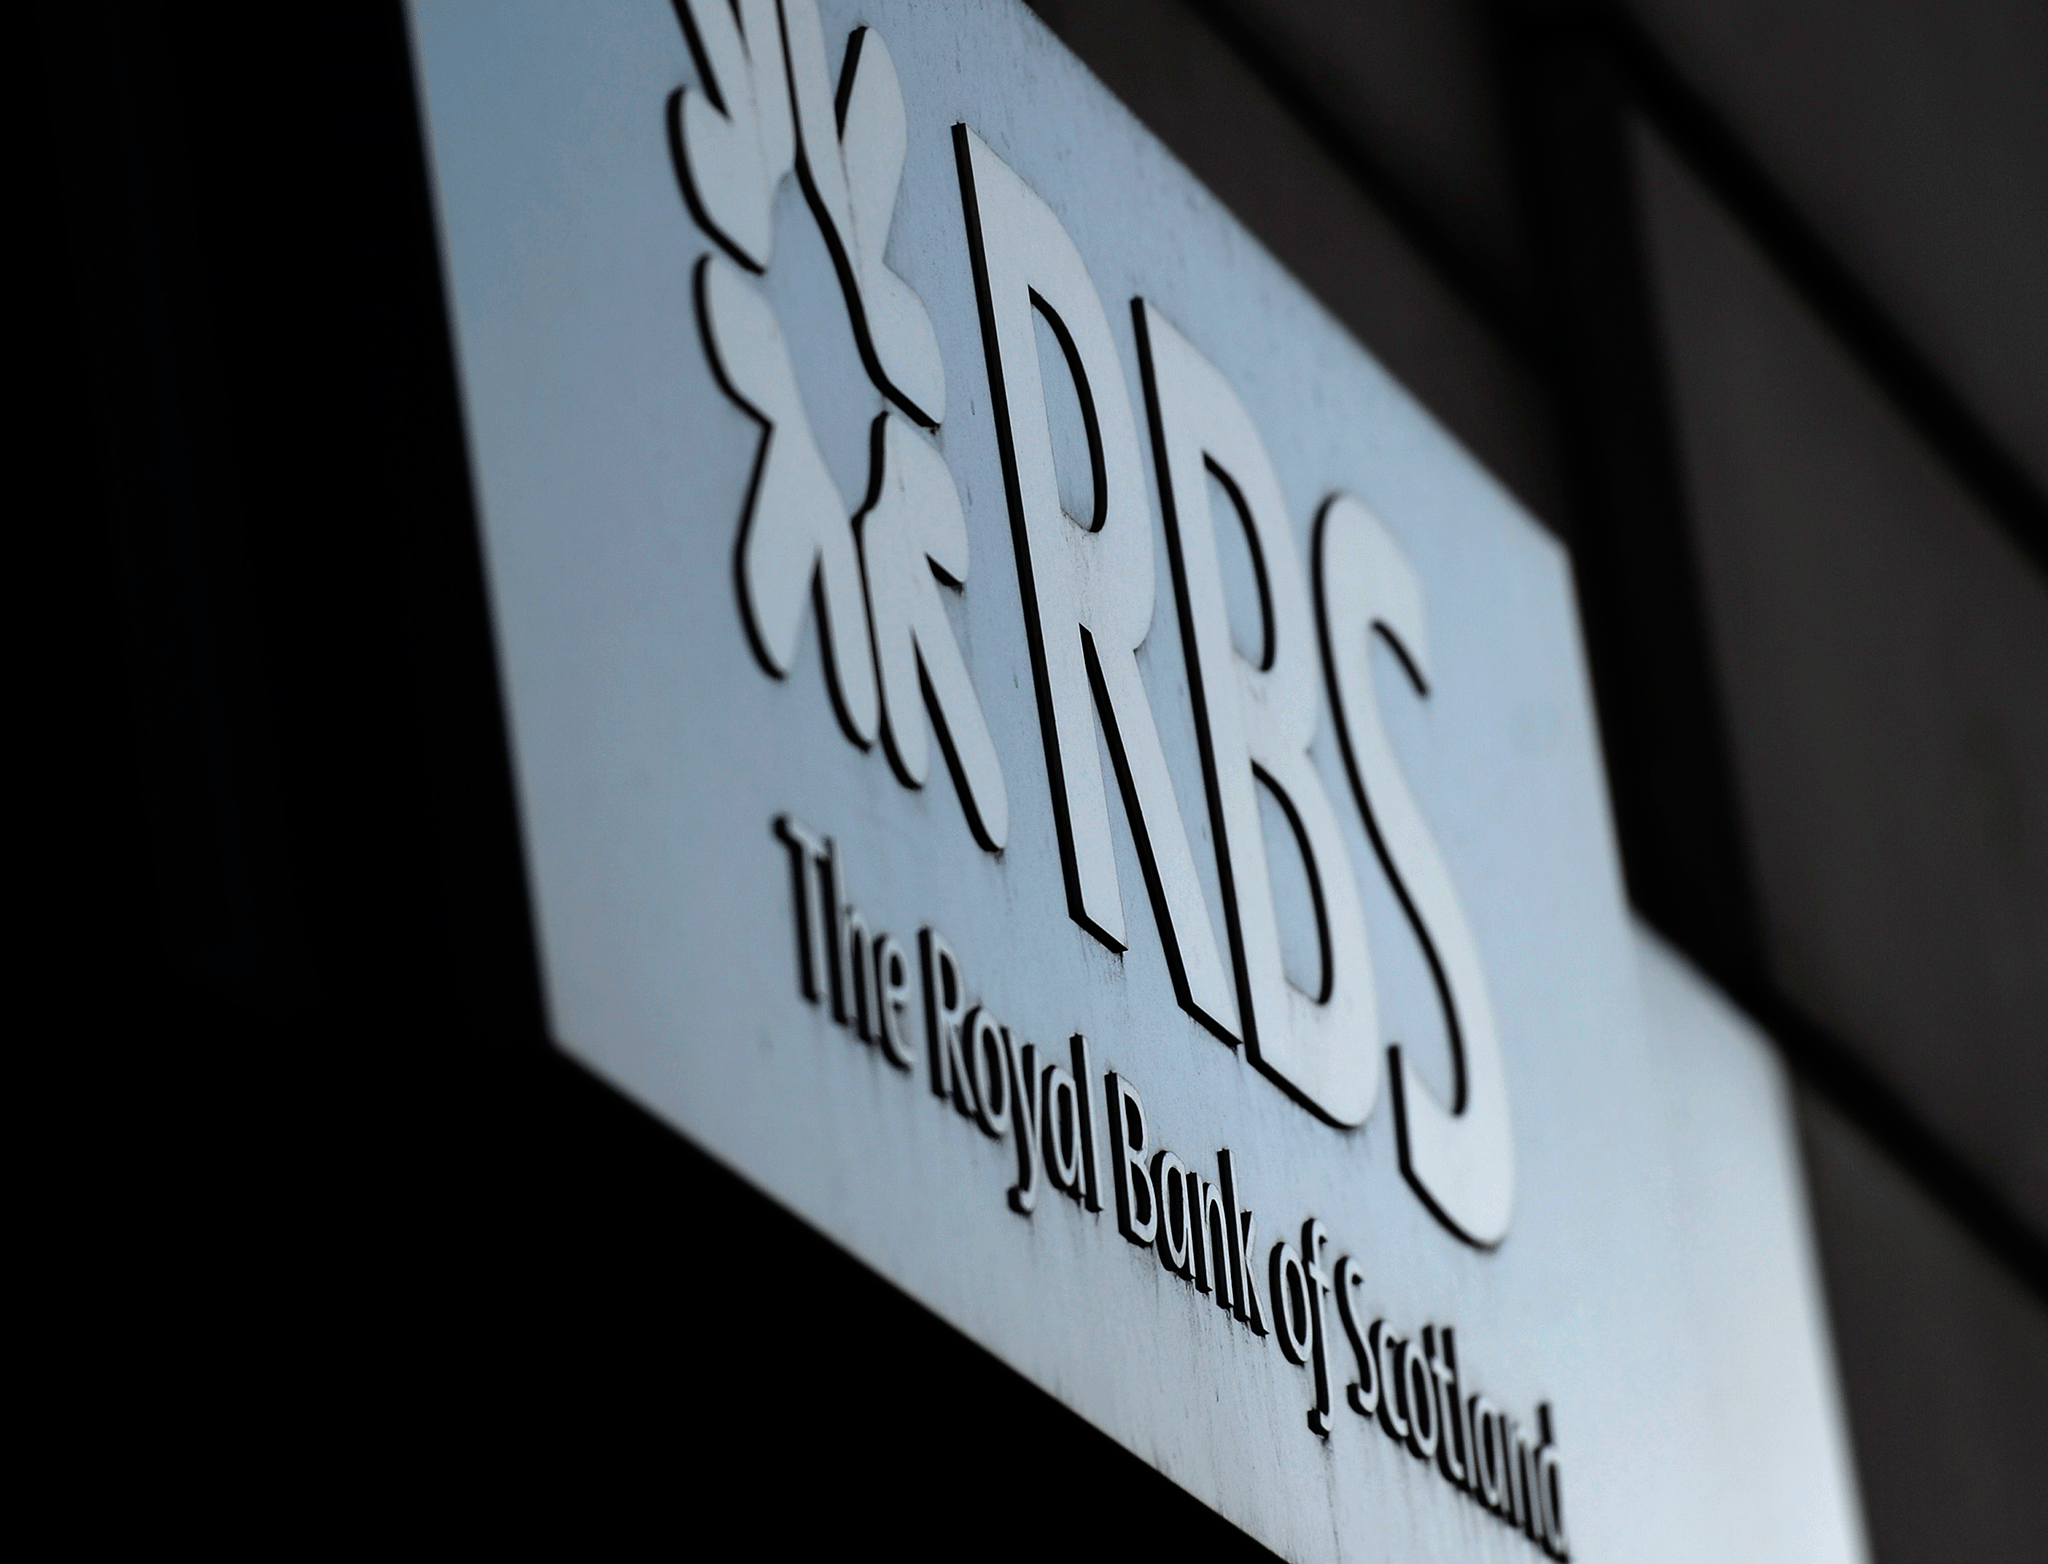 Former RBS trader fined £250,000 and banned from City by FCA